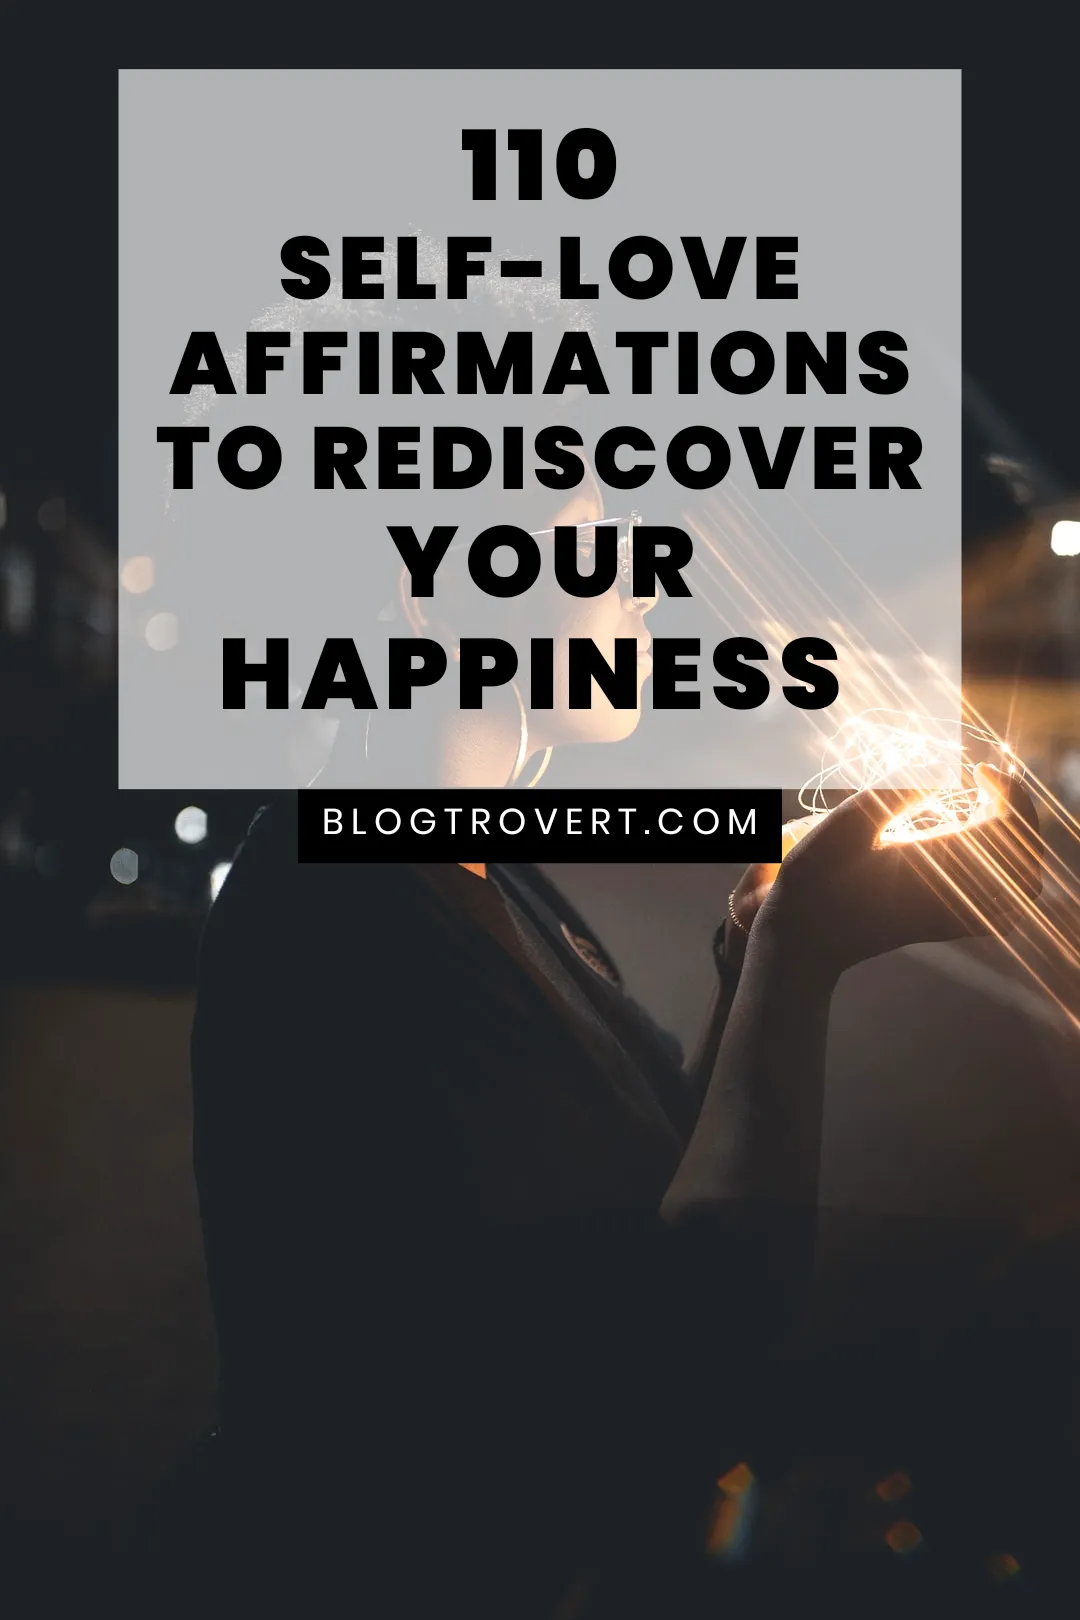 110 powerful affirmations for self-love 1